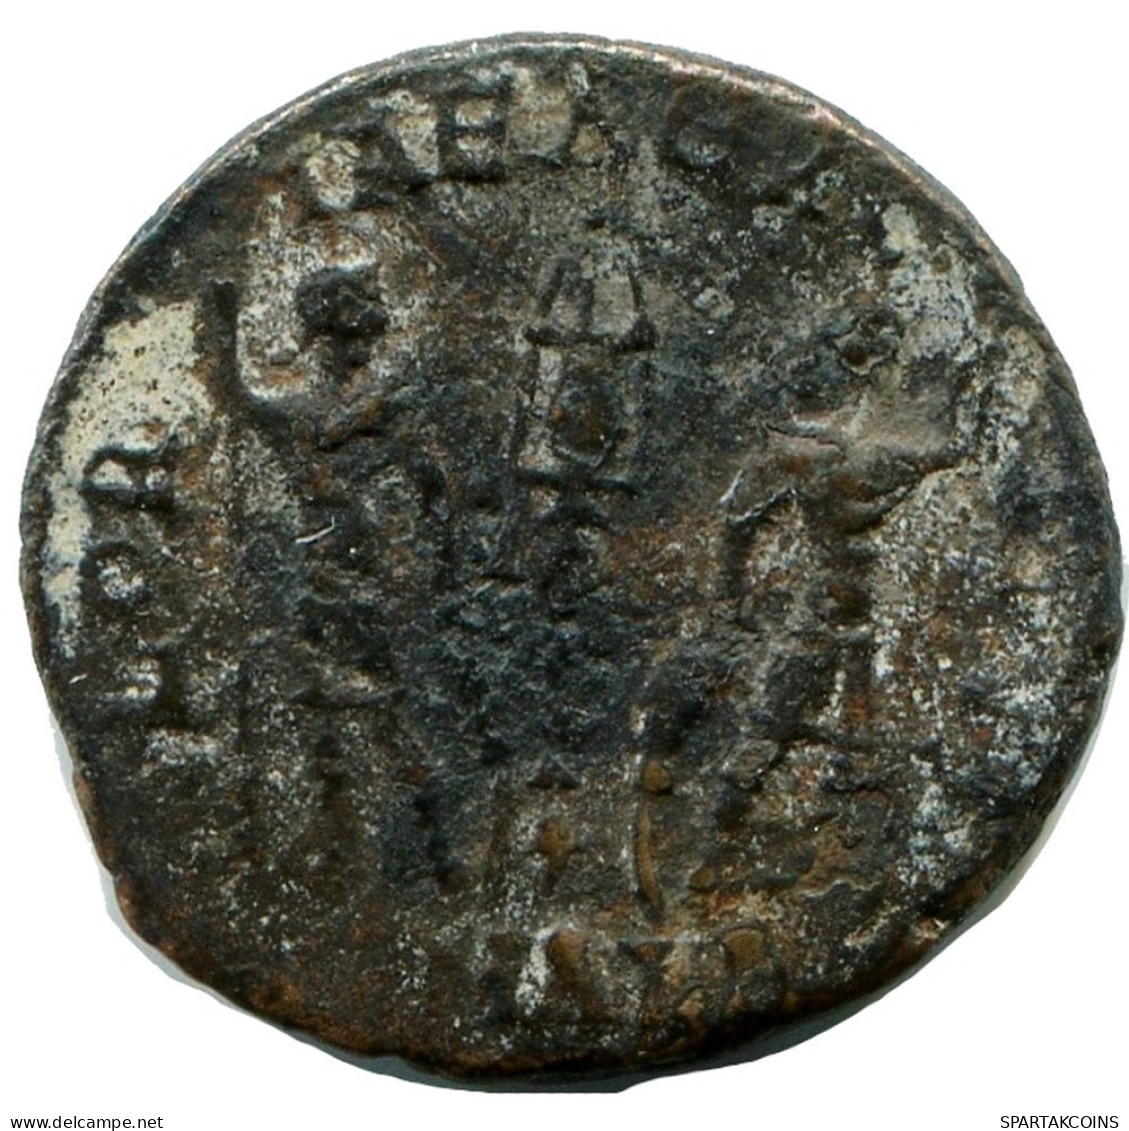 CONSTANS MINTED IN ALEKSANDRIA FOUND IN IHNASYAH HOARD EGYPT #ANC11349.14.D.A - El Impero Christiano (307 / 363)